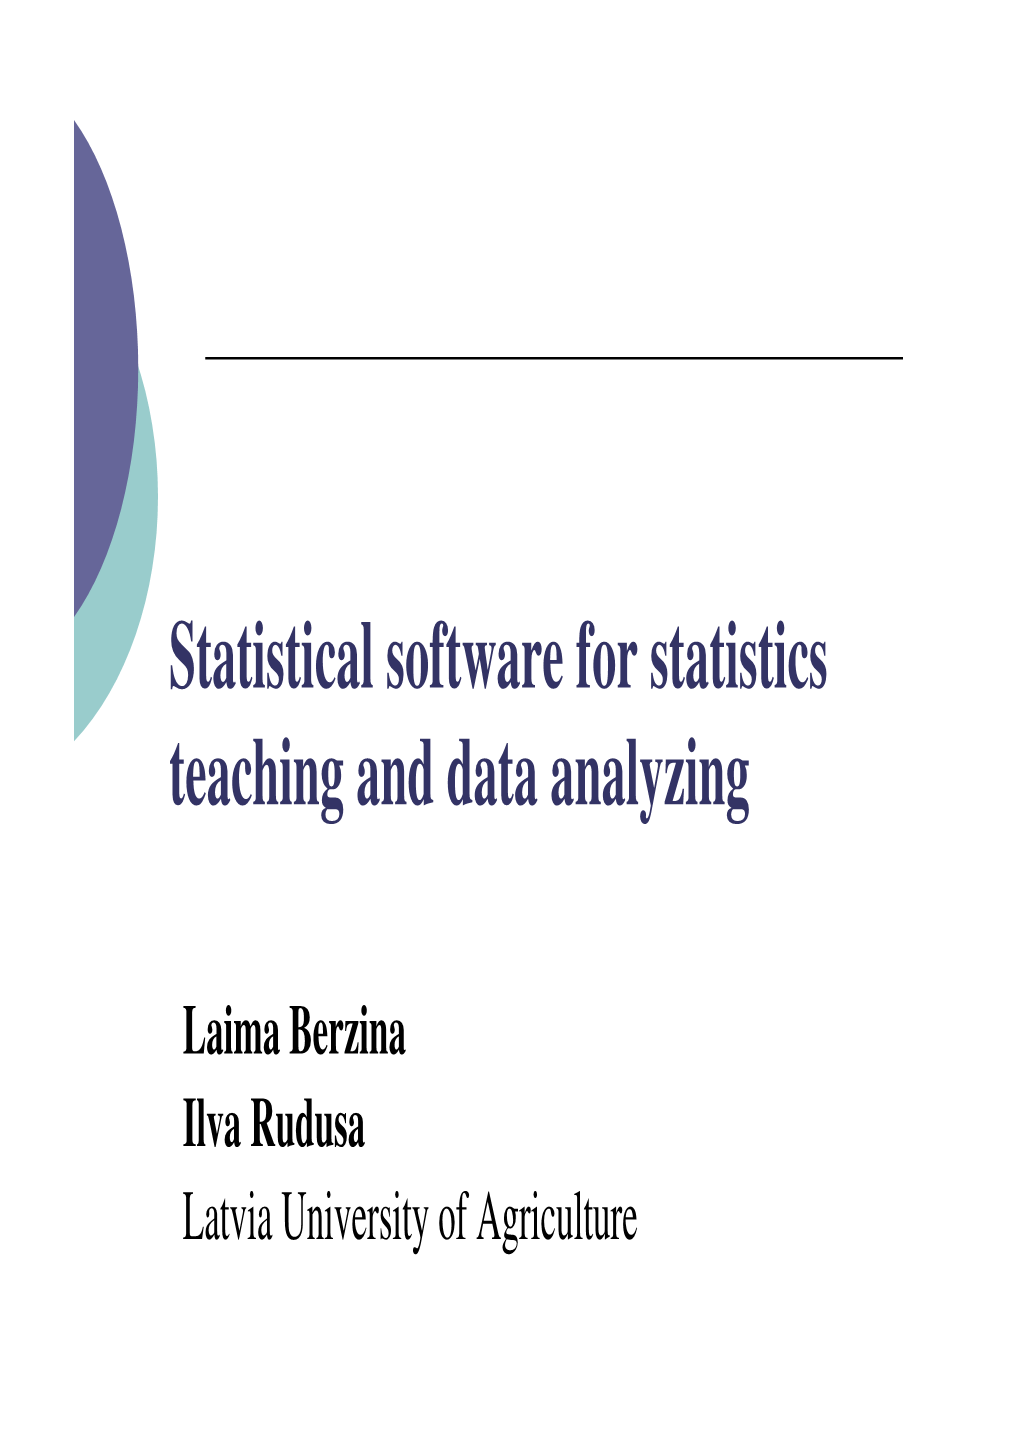 Statistical Software for Statistics Teaching and Data Analyzing